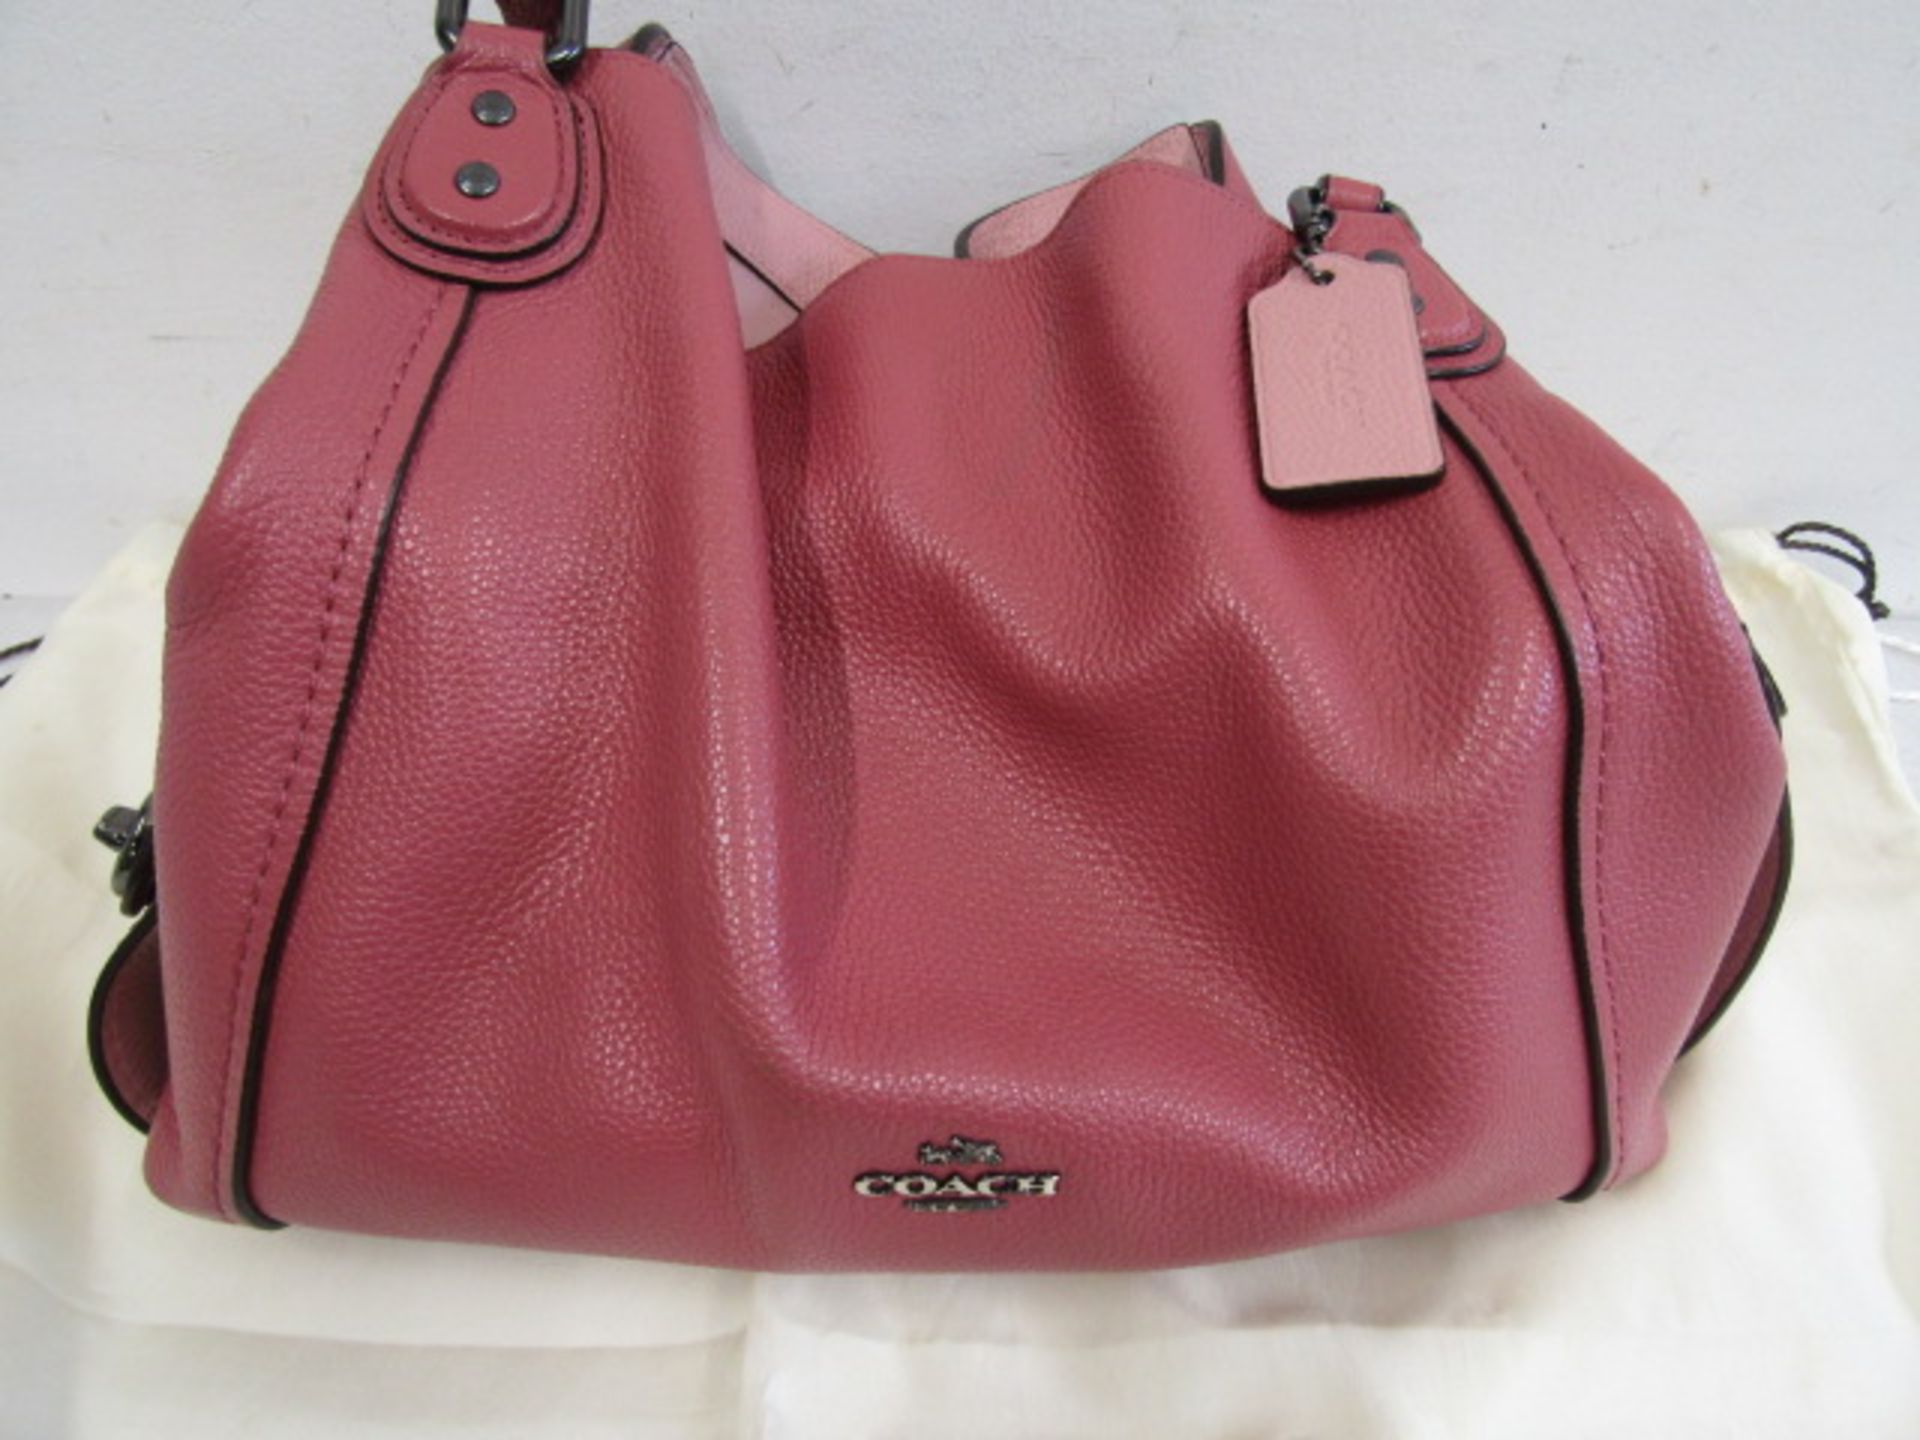 Coach pink pebble leather tote bag with dust bag - Image 2 of 7